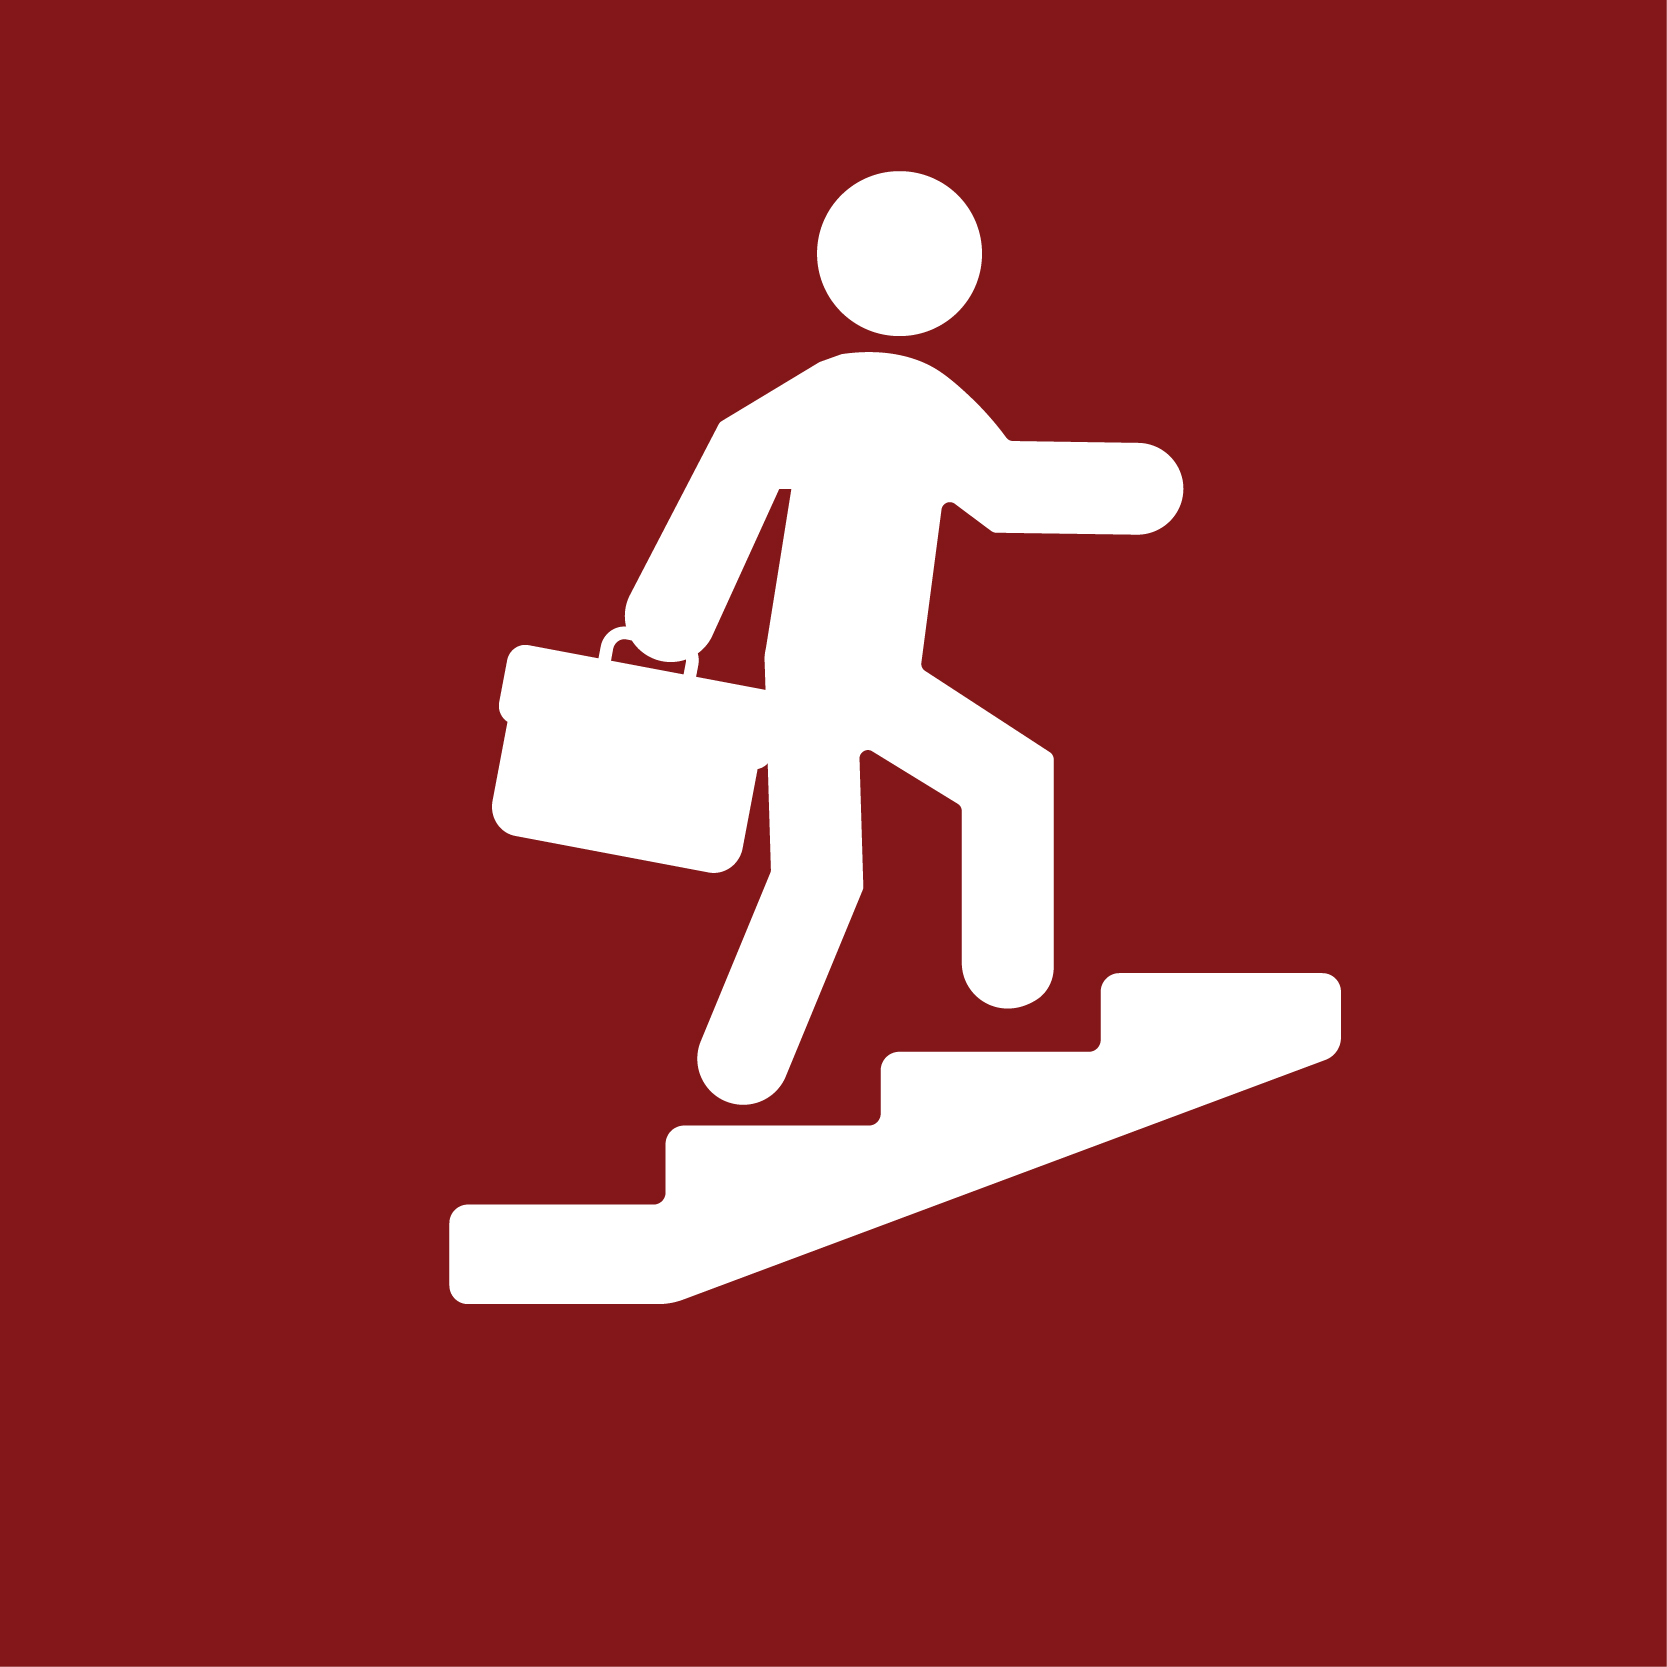 Stick figure walking up stairs carrying a briefcase.